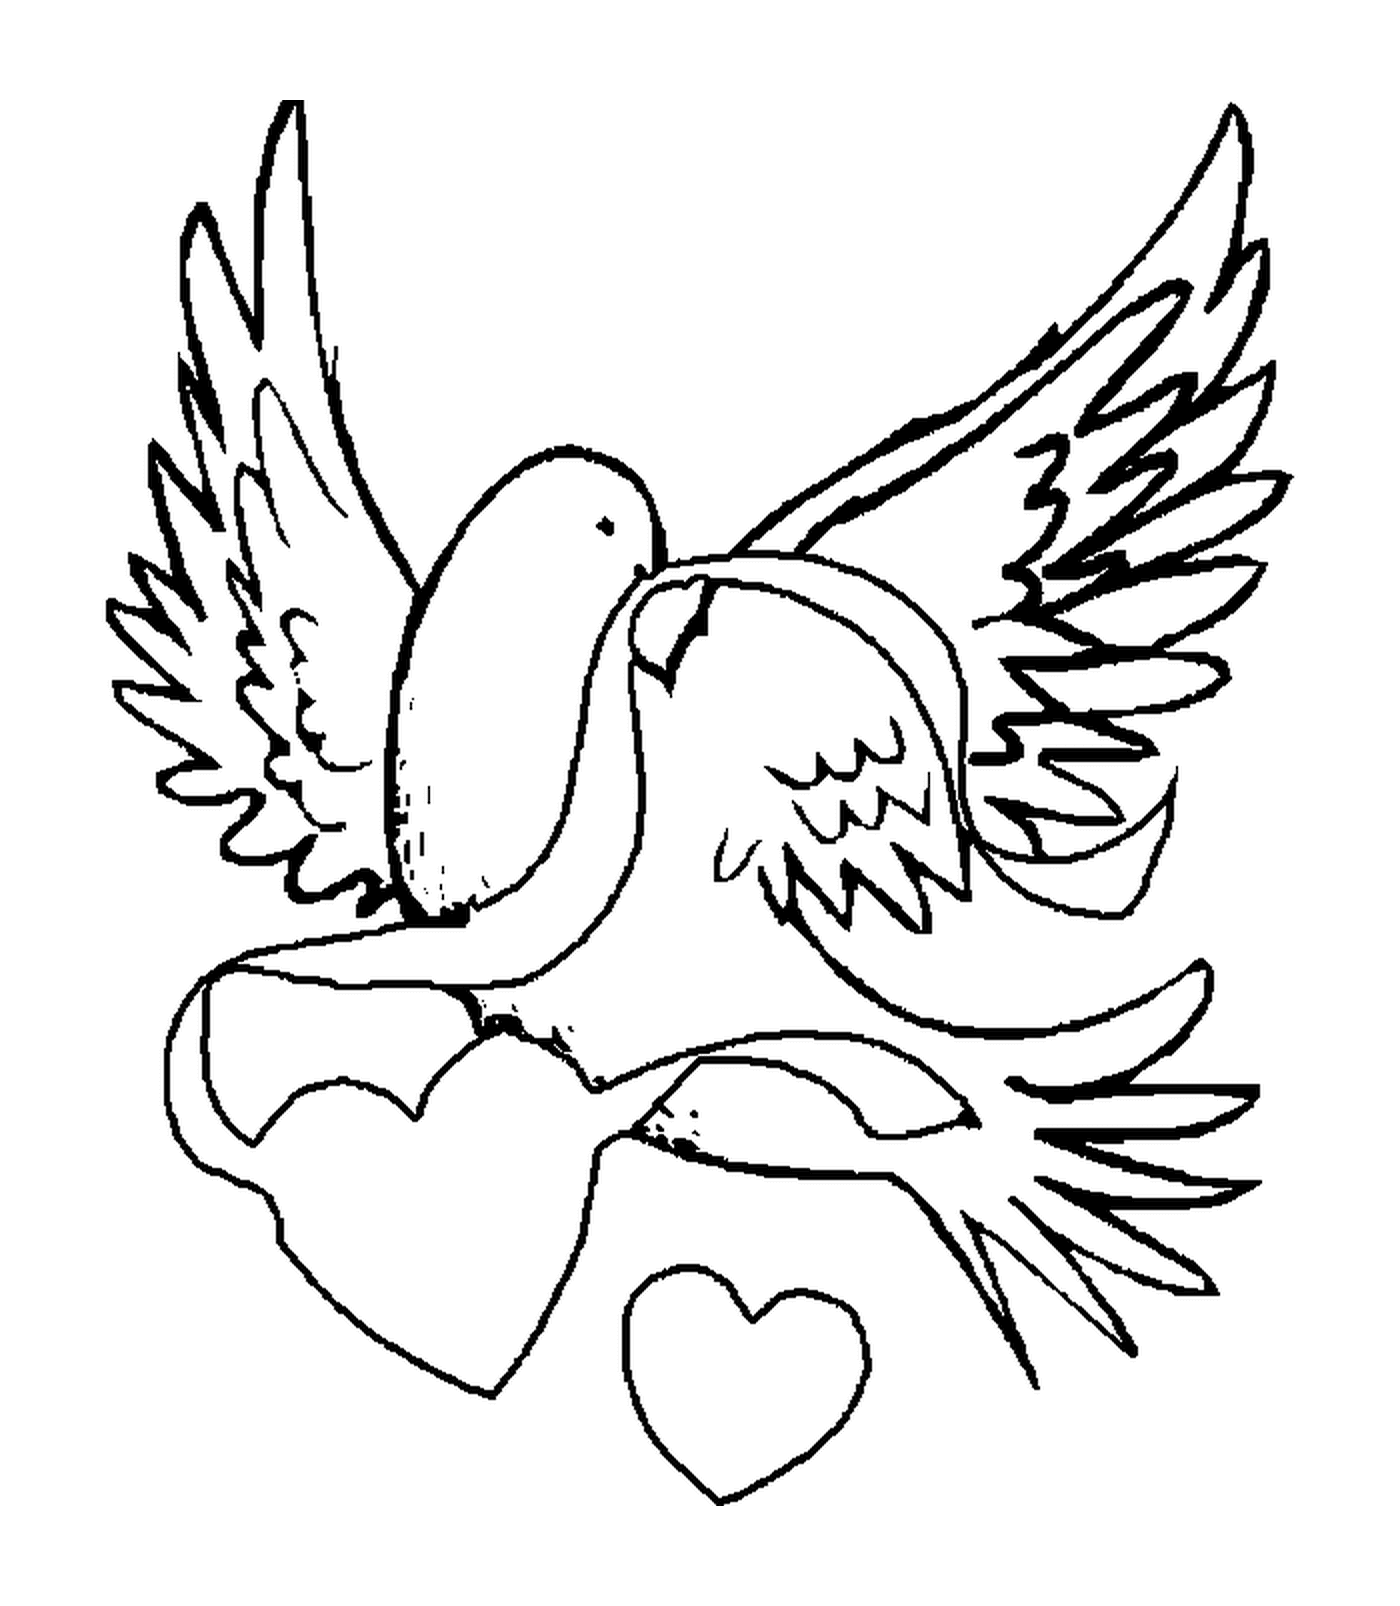  A bird flying with a heart 